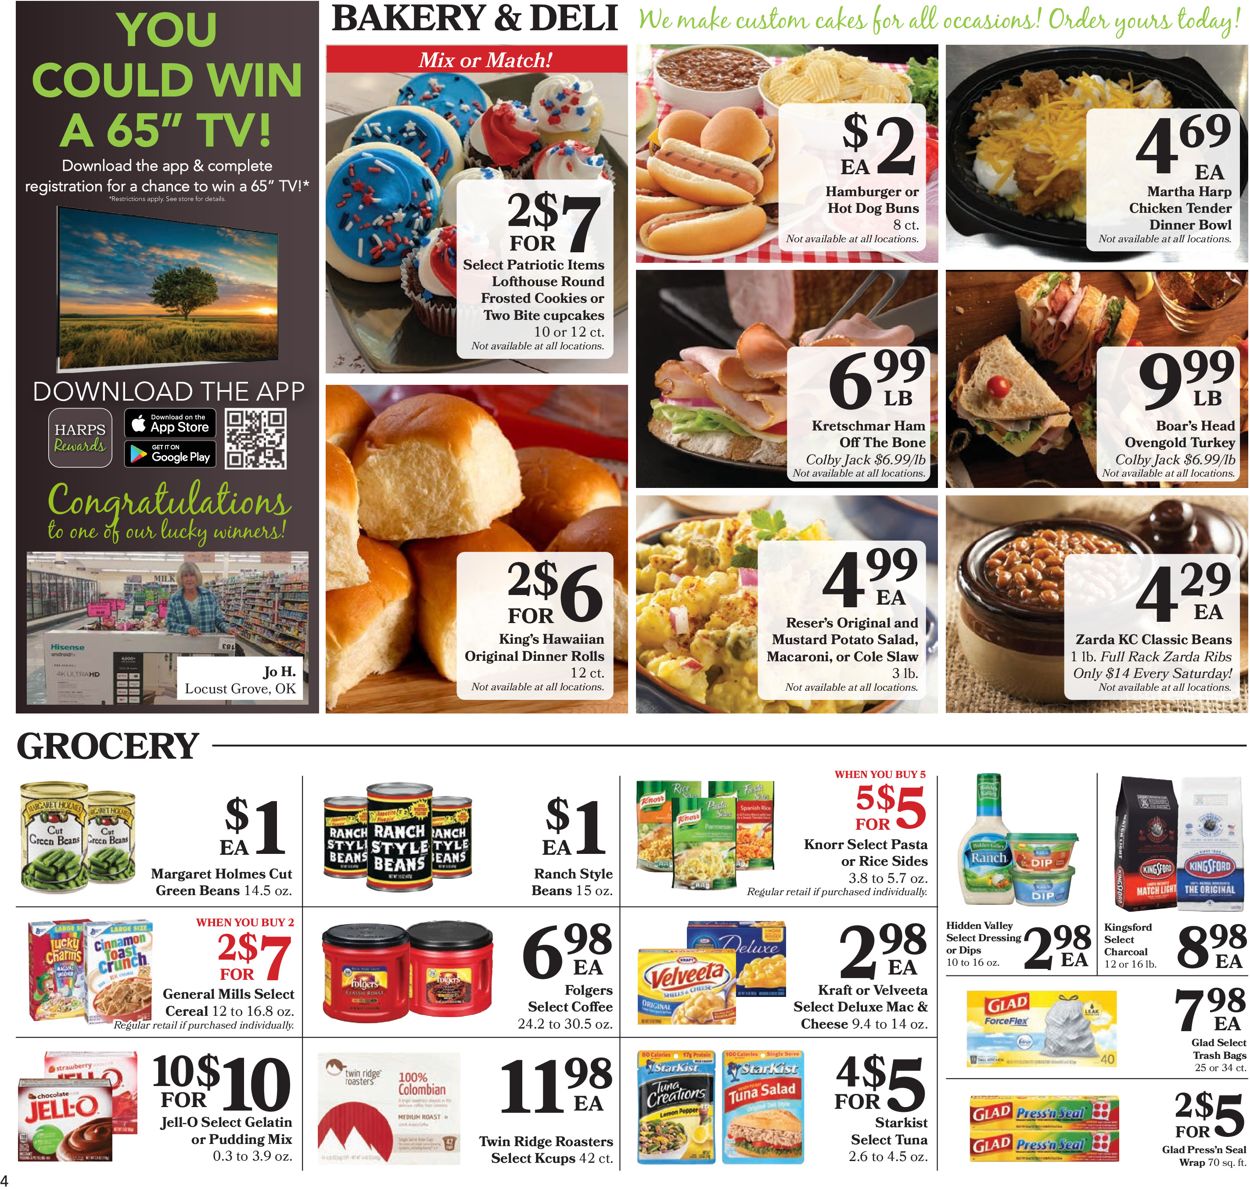 Catalogue Harps Foods from 06/30/2021